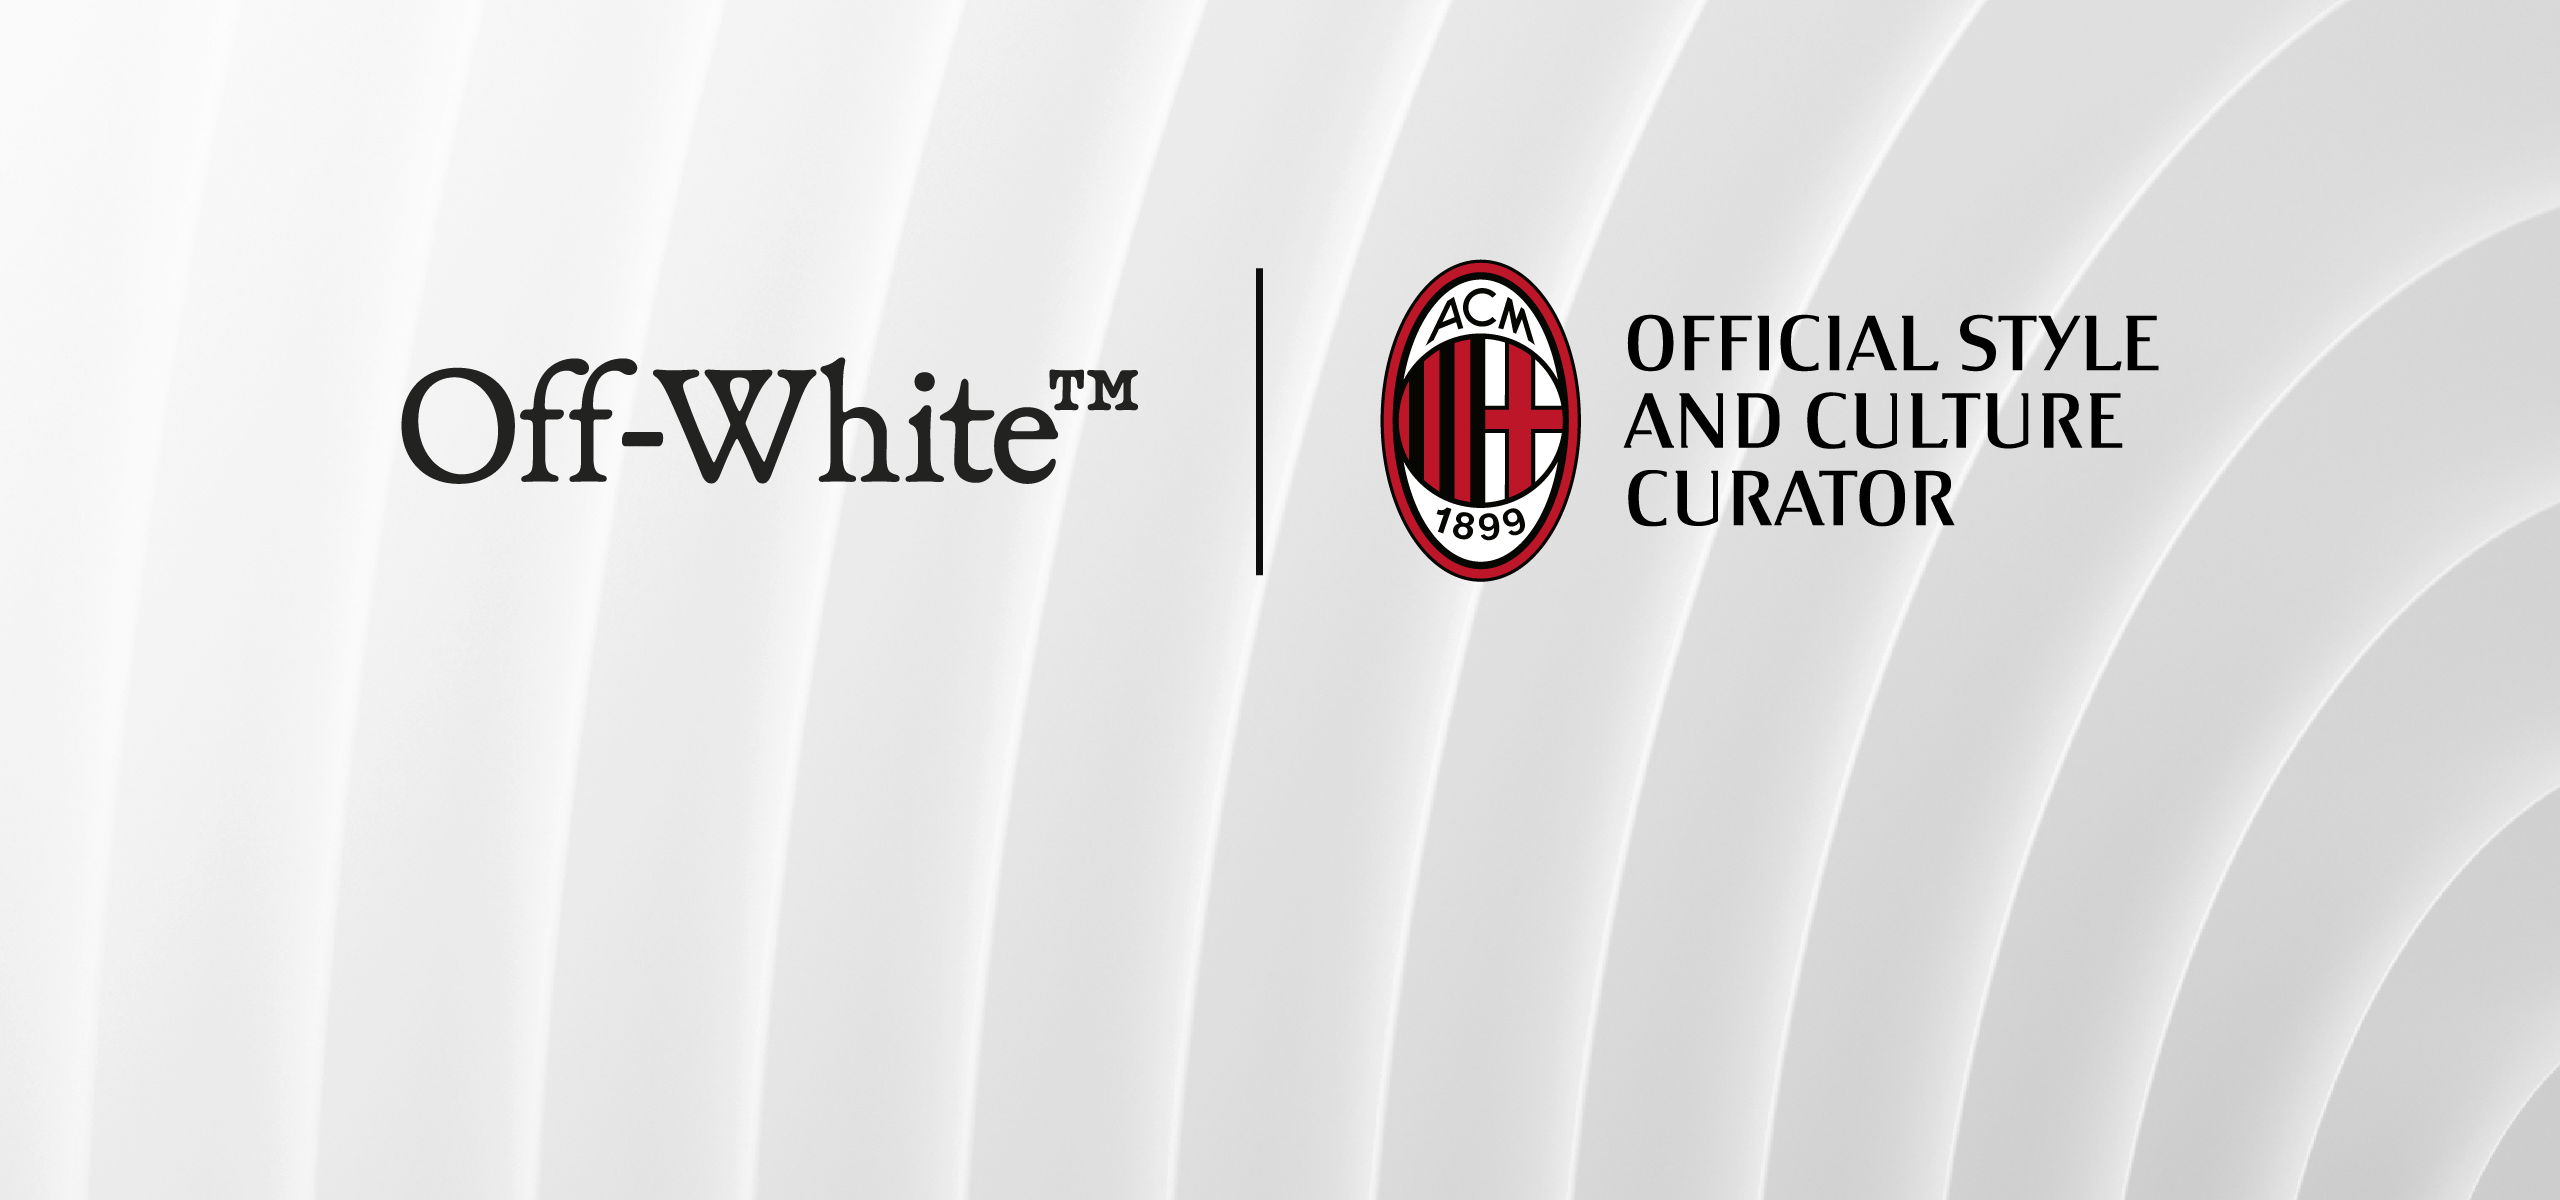 First details of the union between Off-White™ and AC Milan - HIGHXTAR.